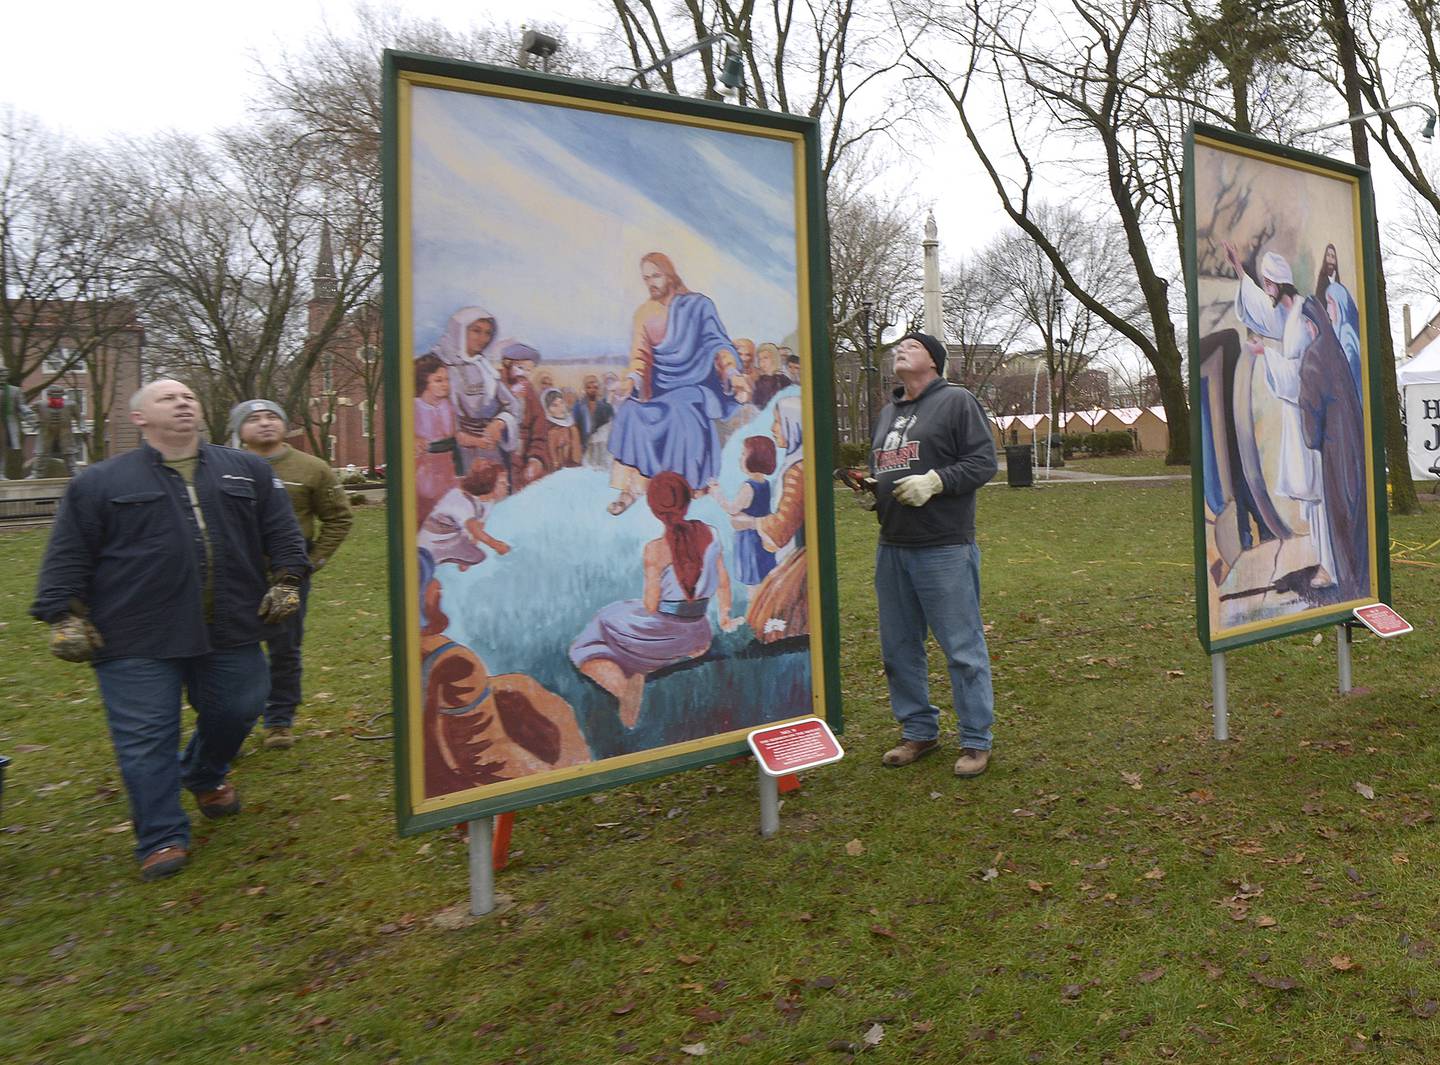 Volunteers check their work after putting up the 16 paintings depicting the life of Christ at Washington Square in Ottawa. The Ottawa Freedom Association has erected the paintings each year since 1992 after winning a lengthy court battle.